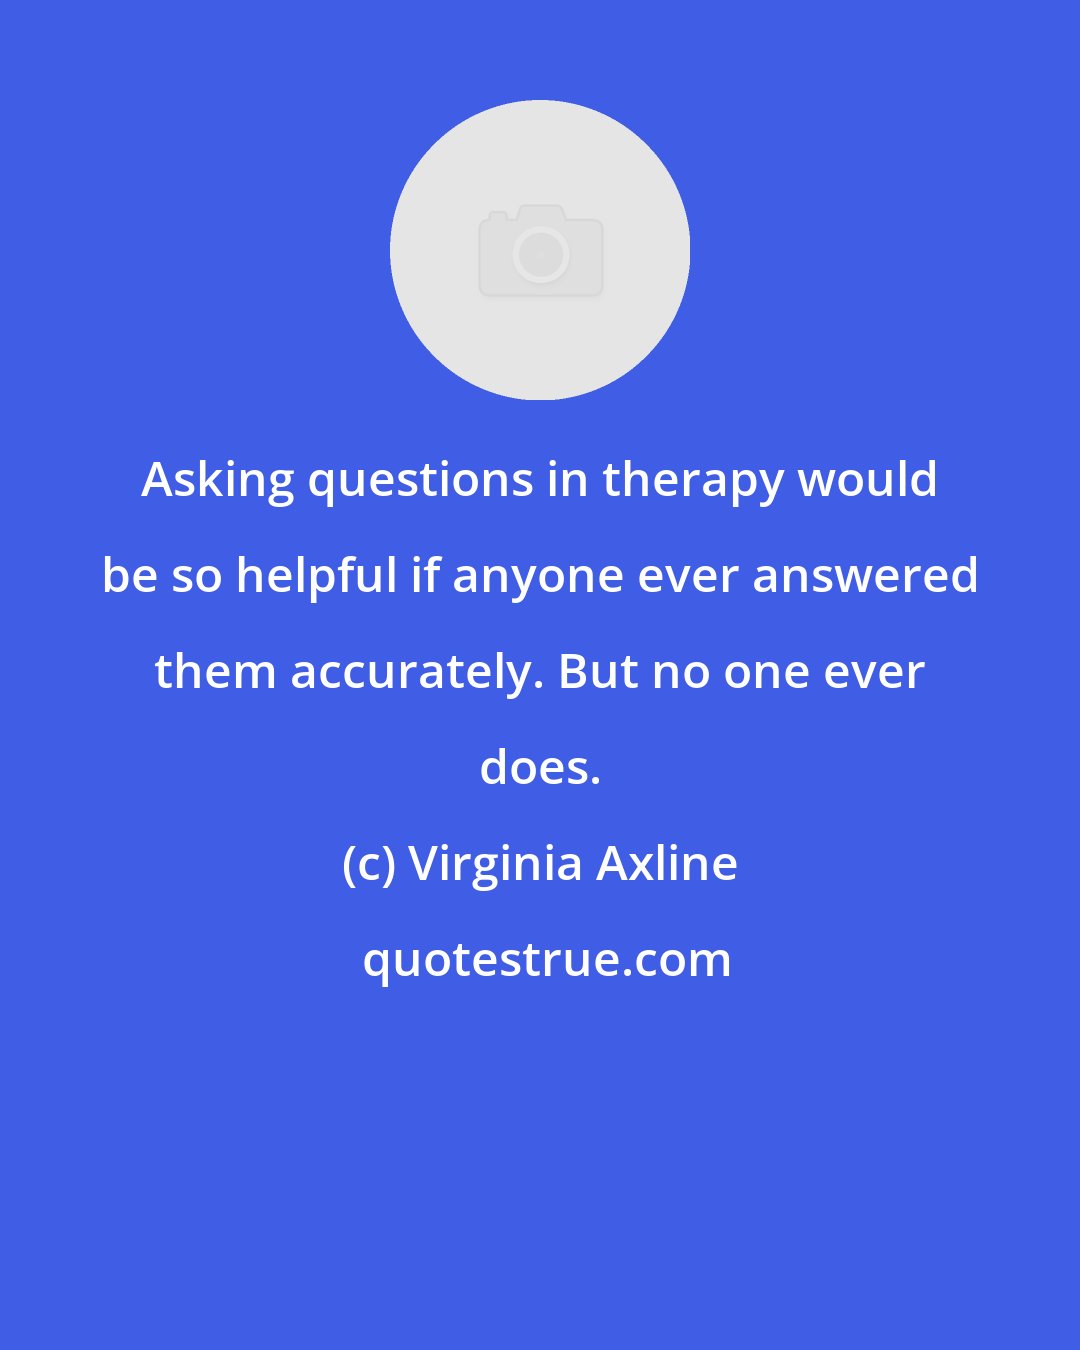 Virginia Axline: Asking questions in therapy would be so helpful if anyone ever answered them accurately. But no one ever does.